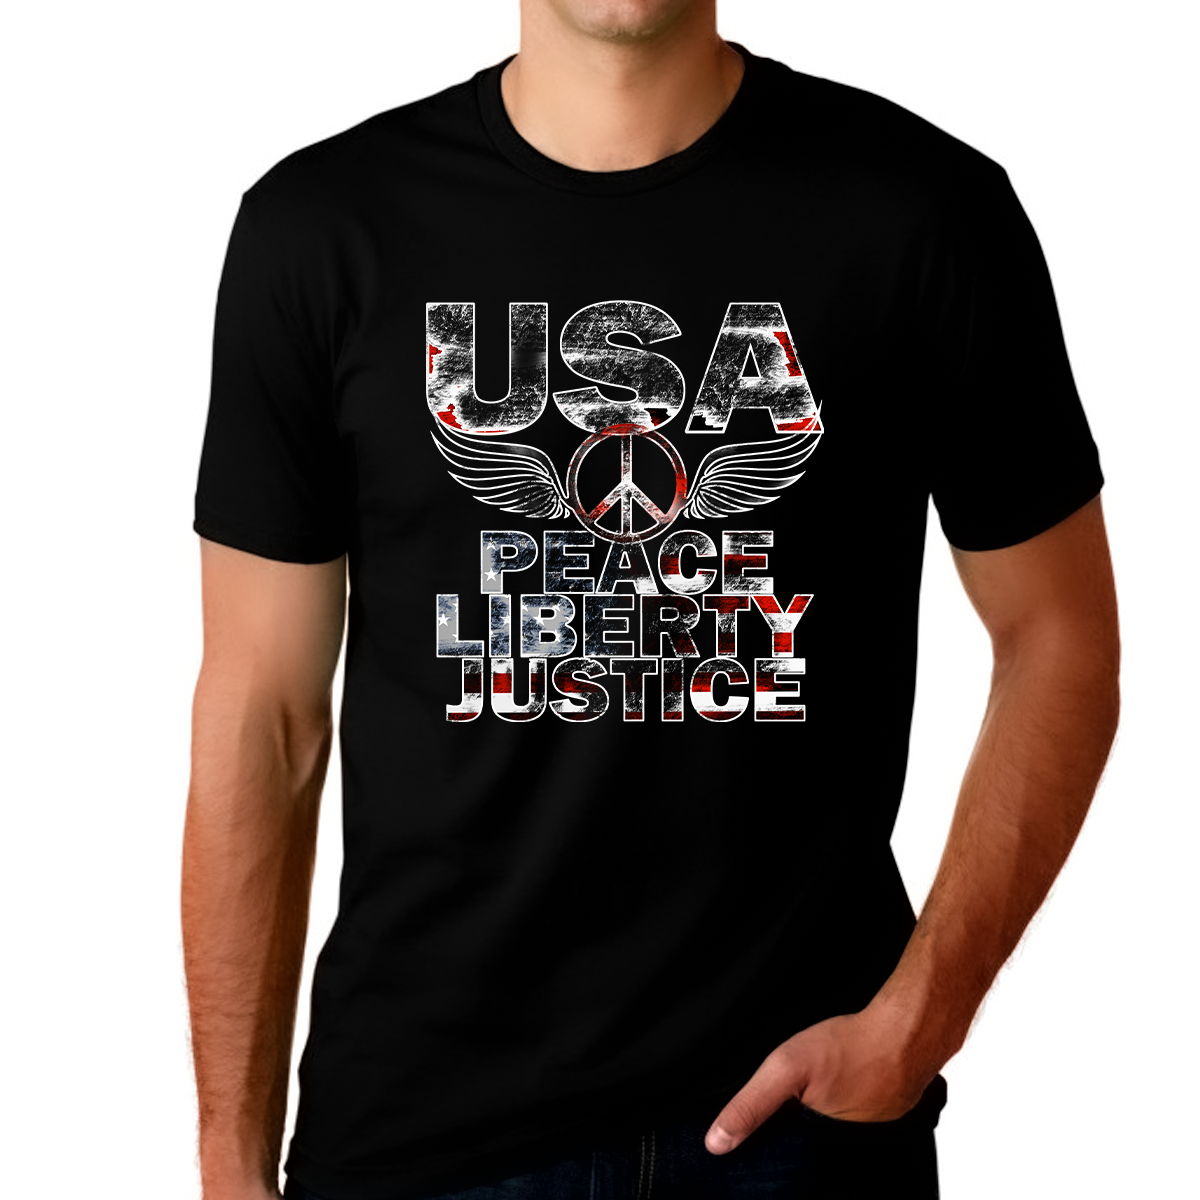 4th of July Shirts for Men Patriotic Shirts for Men Peace Liberty Justice Black American Flag Shirt - Fire Fit Designs